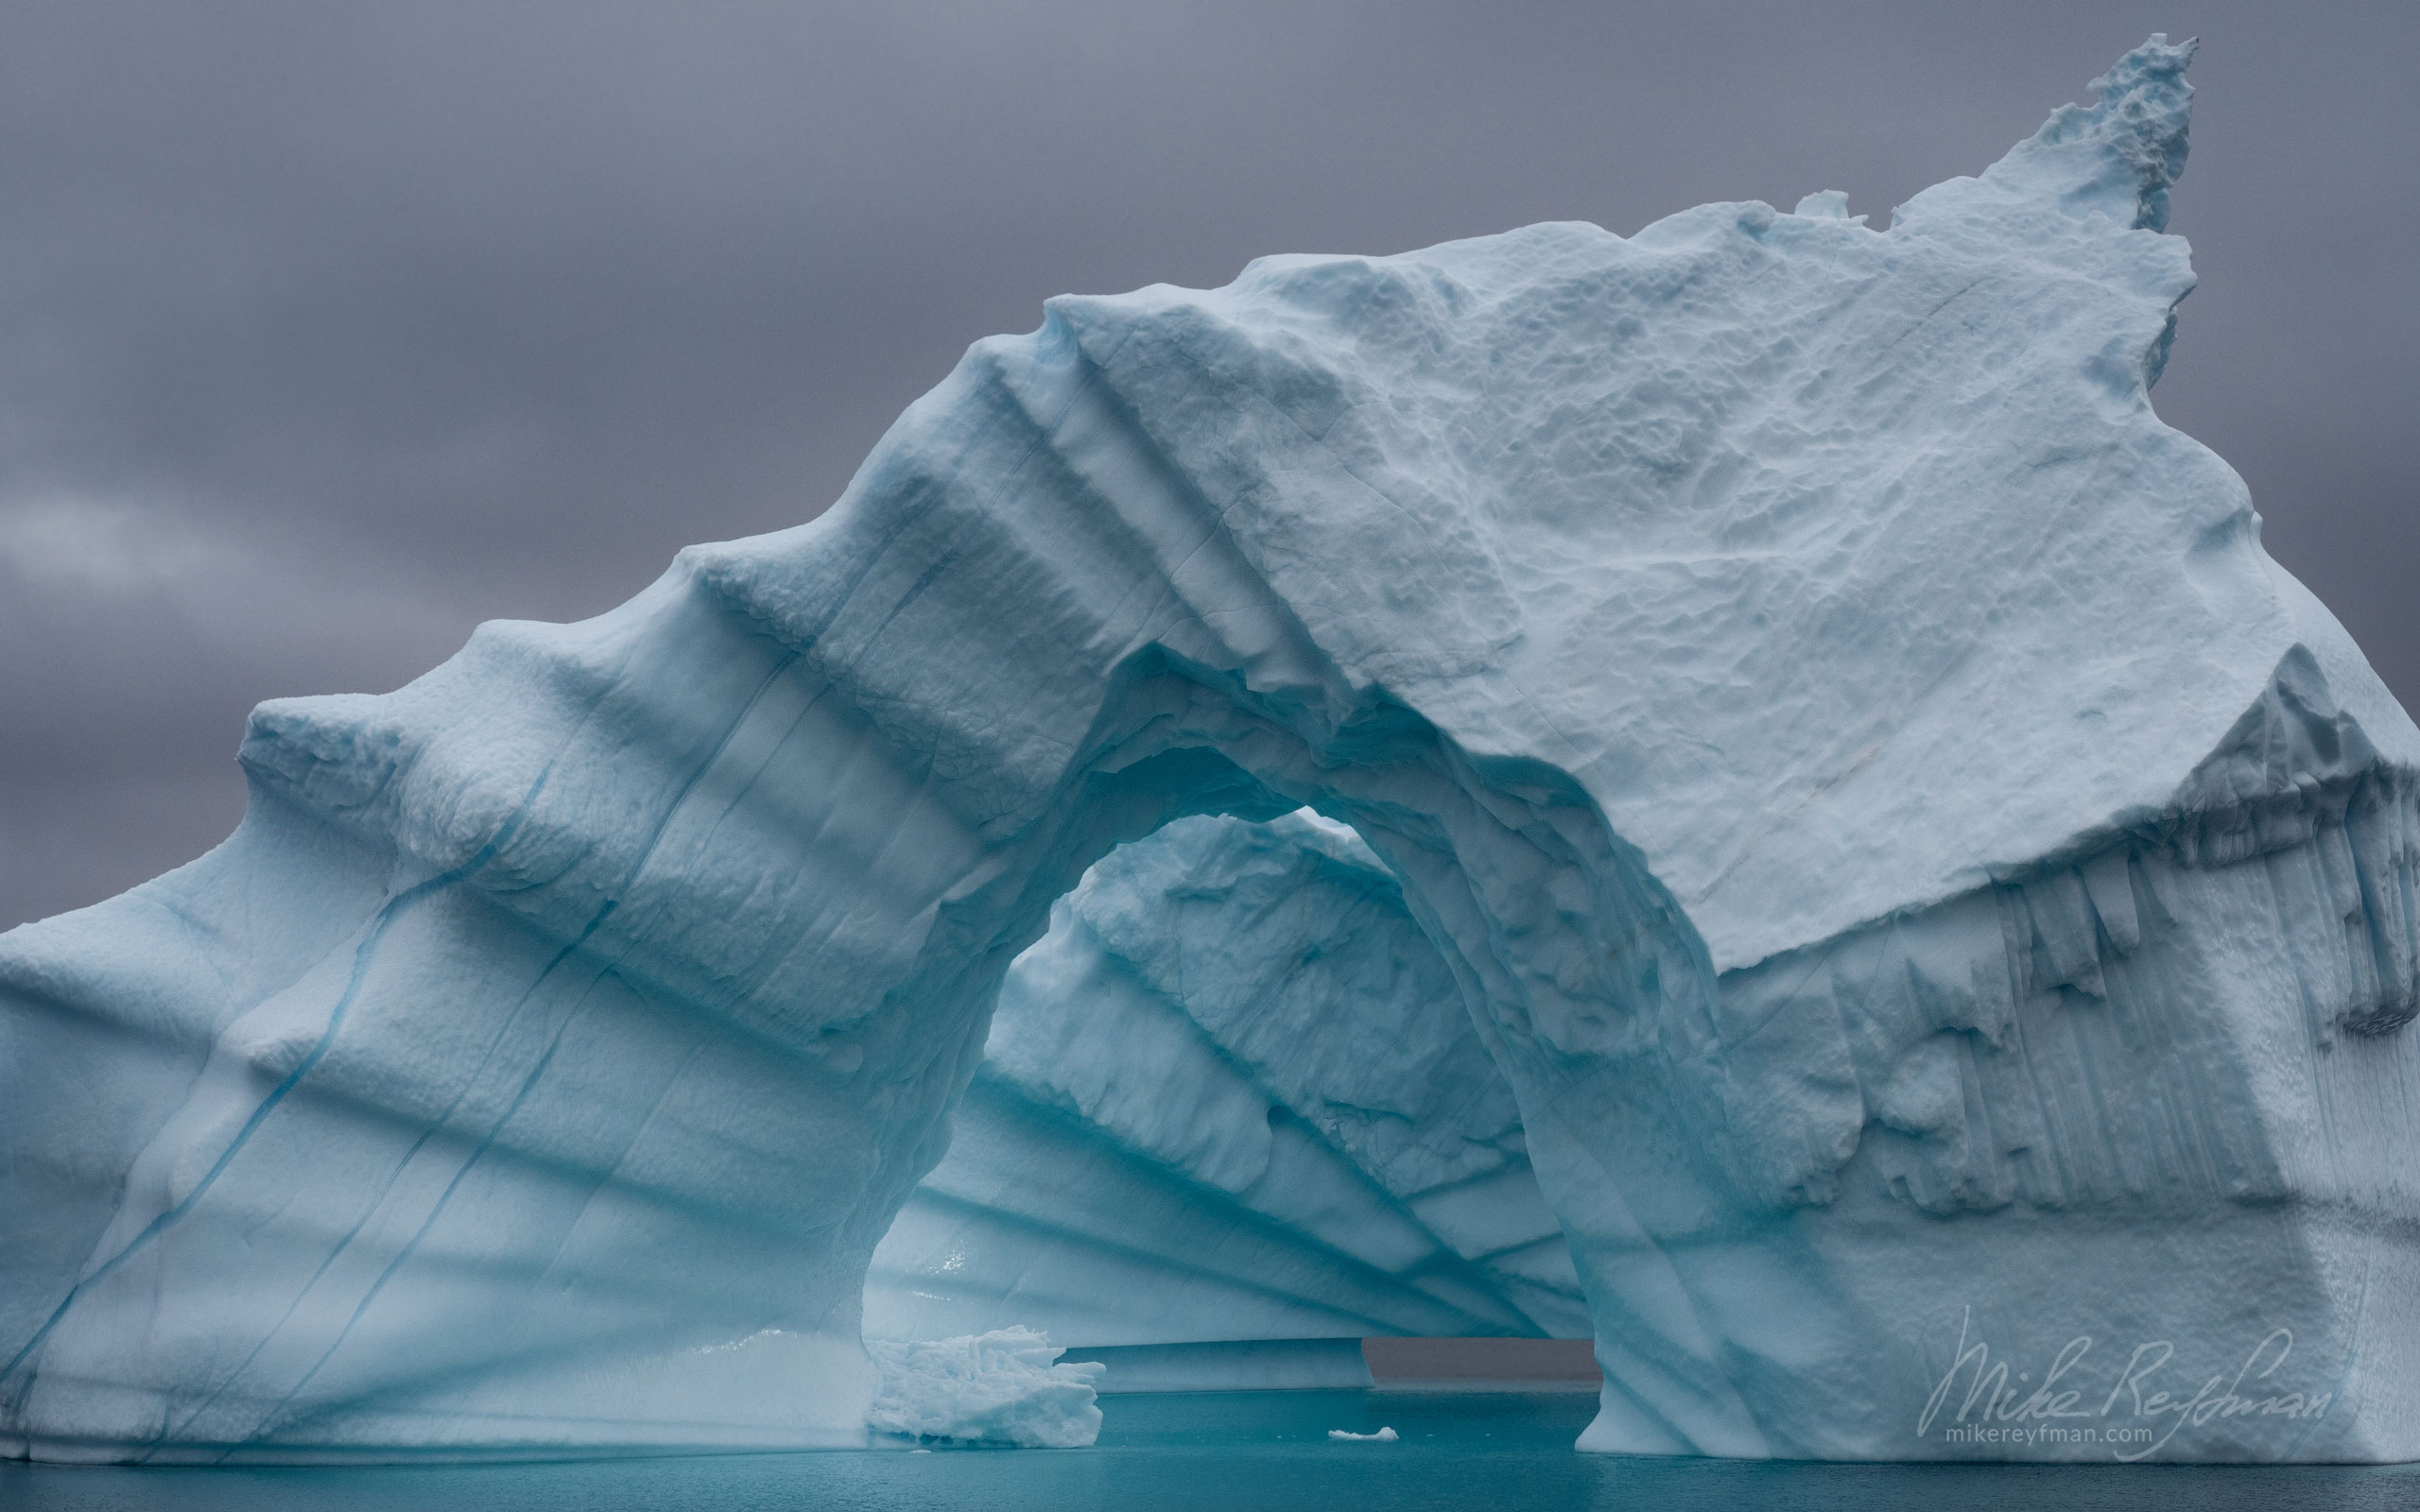 Iceberg in Scoresby Sund. Greenland. 003-GR-SC_50B7597 - The Scoresby Sund fjord system and the settlement of Ittoqqortoormiit. East Greenland. - Mike Reyfman Photography